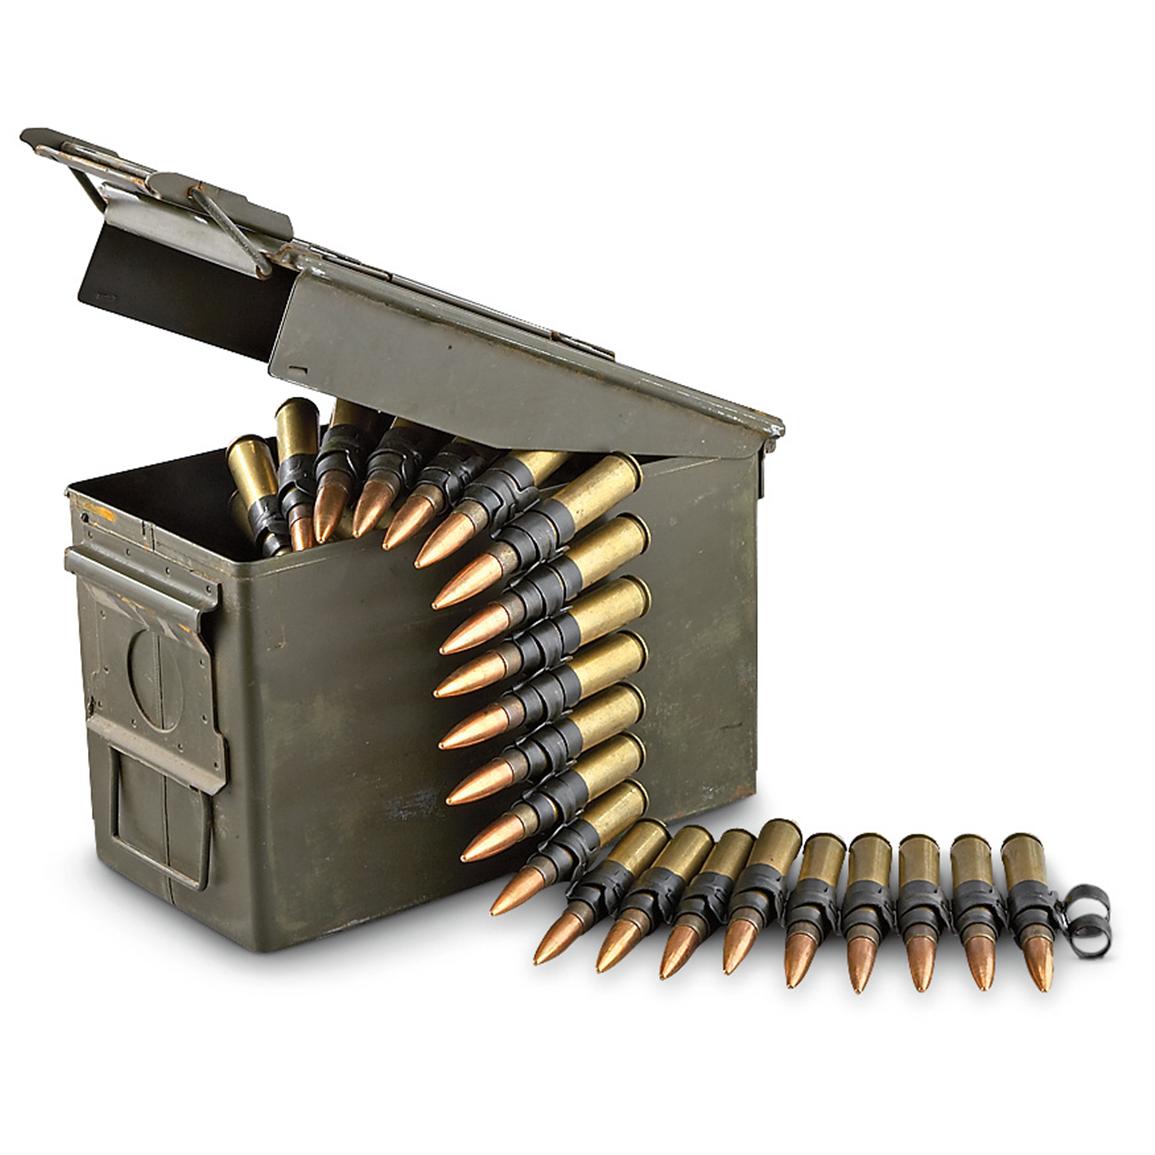 100 Rds 50 Cal 668 Gr Bmg Linked Ammo 50 Bmg Ammo At Sportsman S Guide